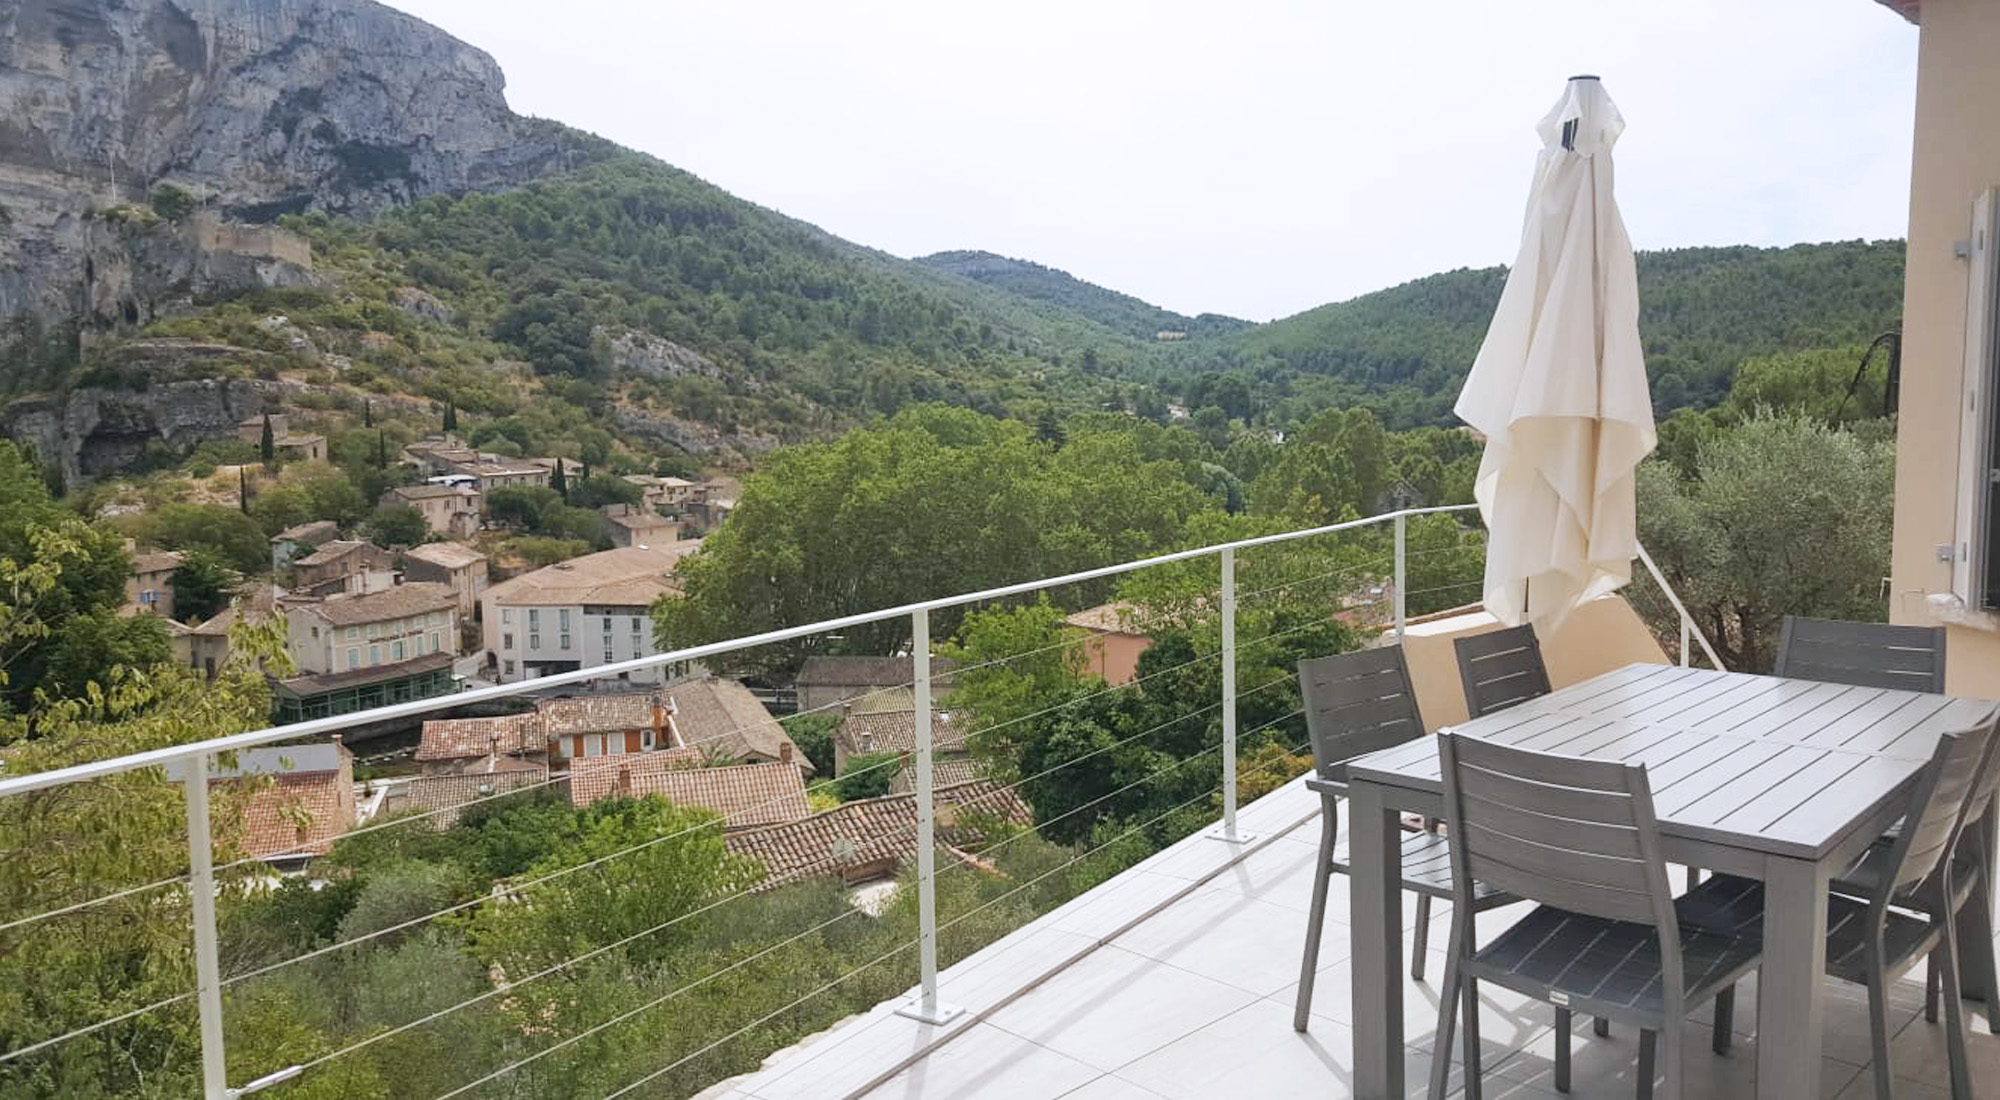 Terrace with view on Fontaine de Vaucluse